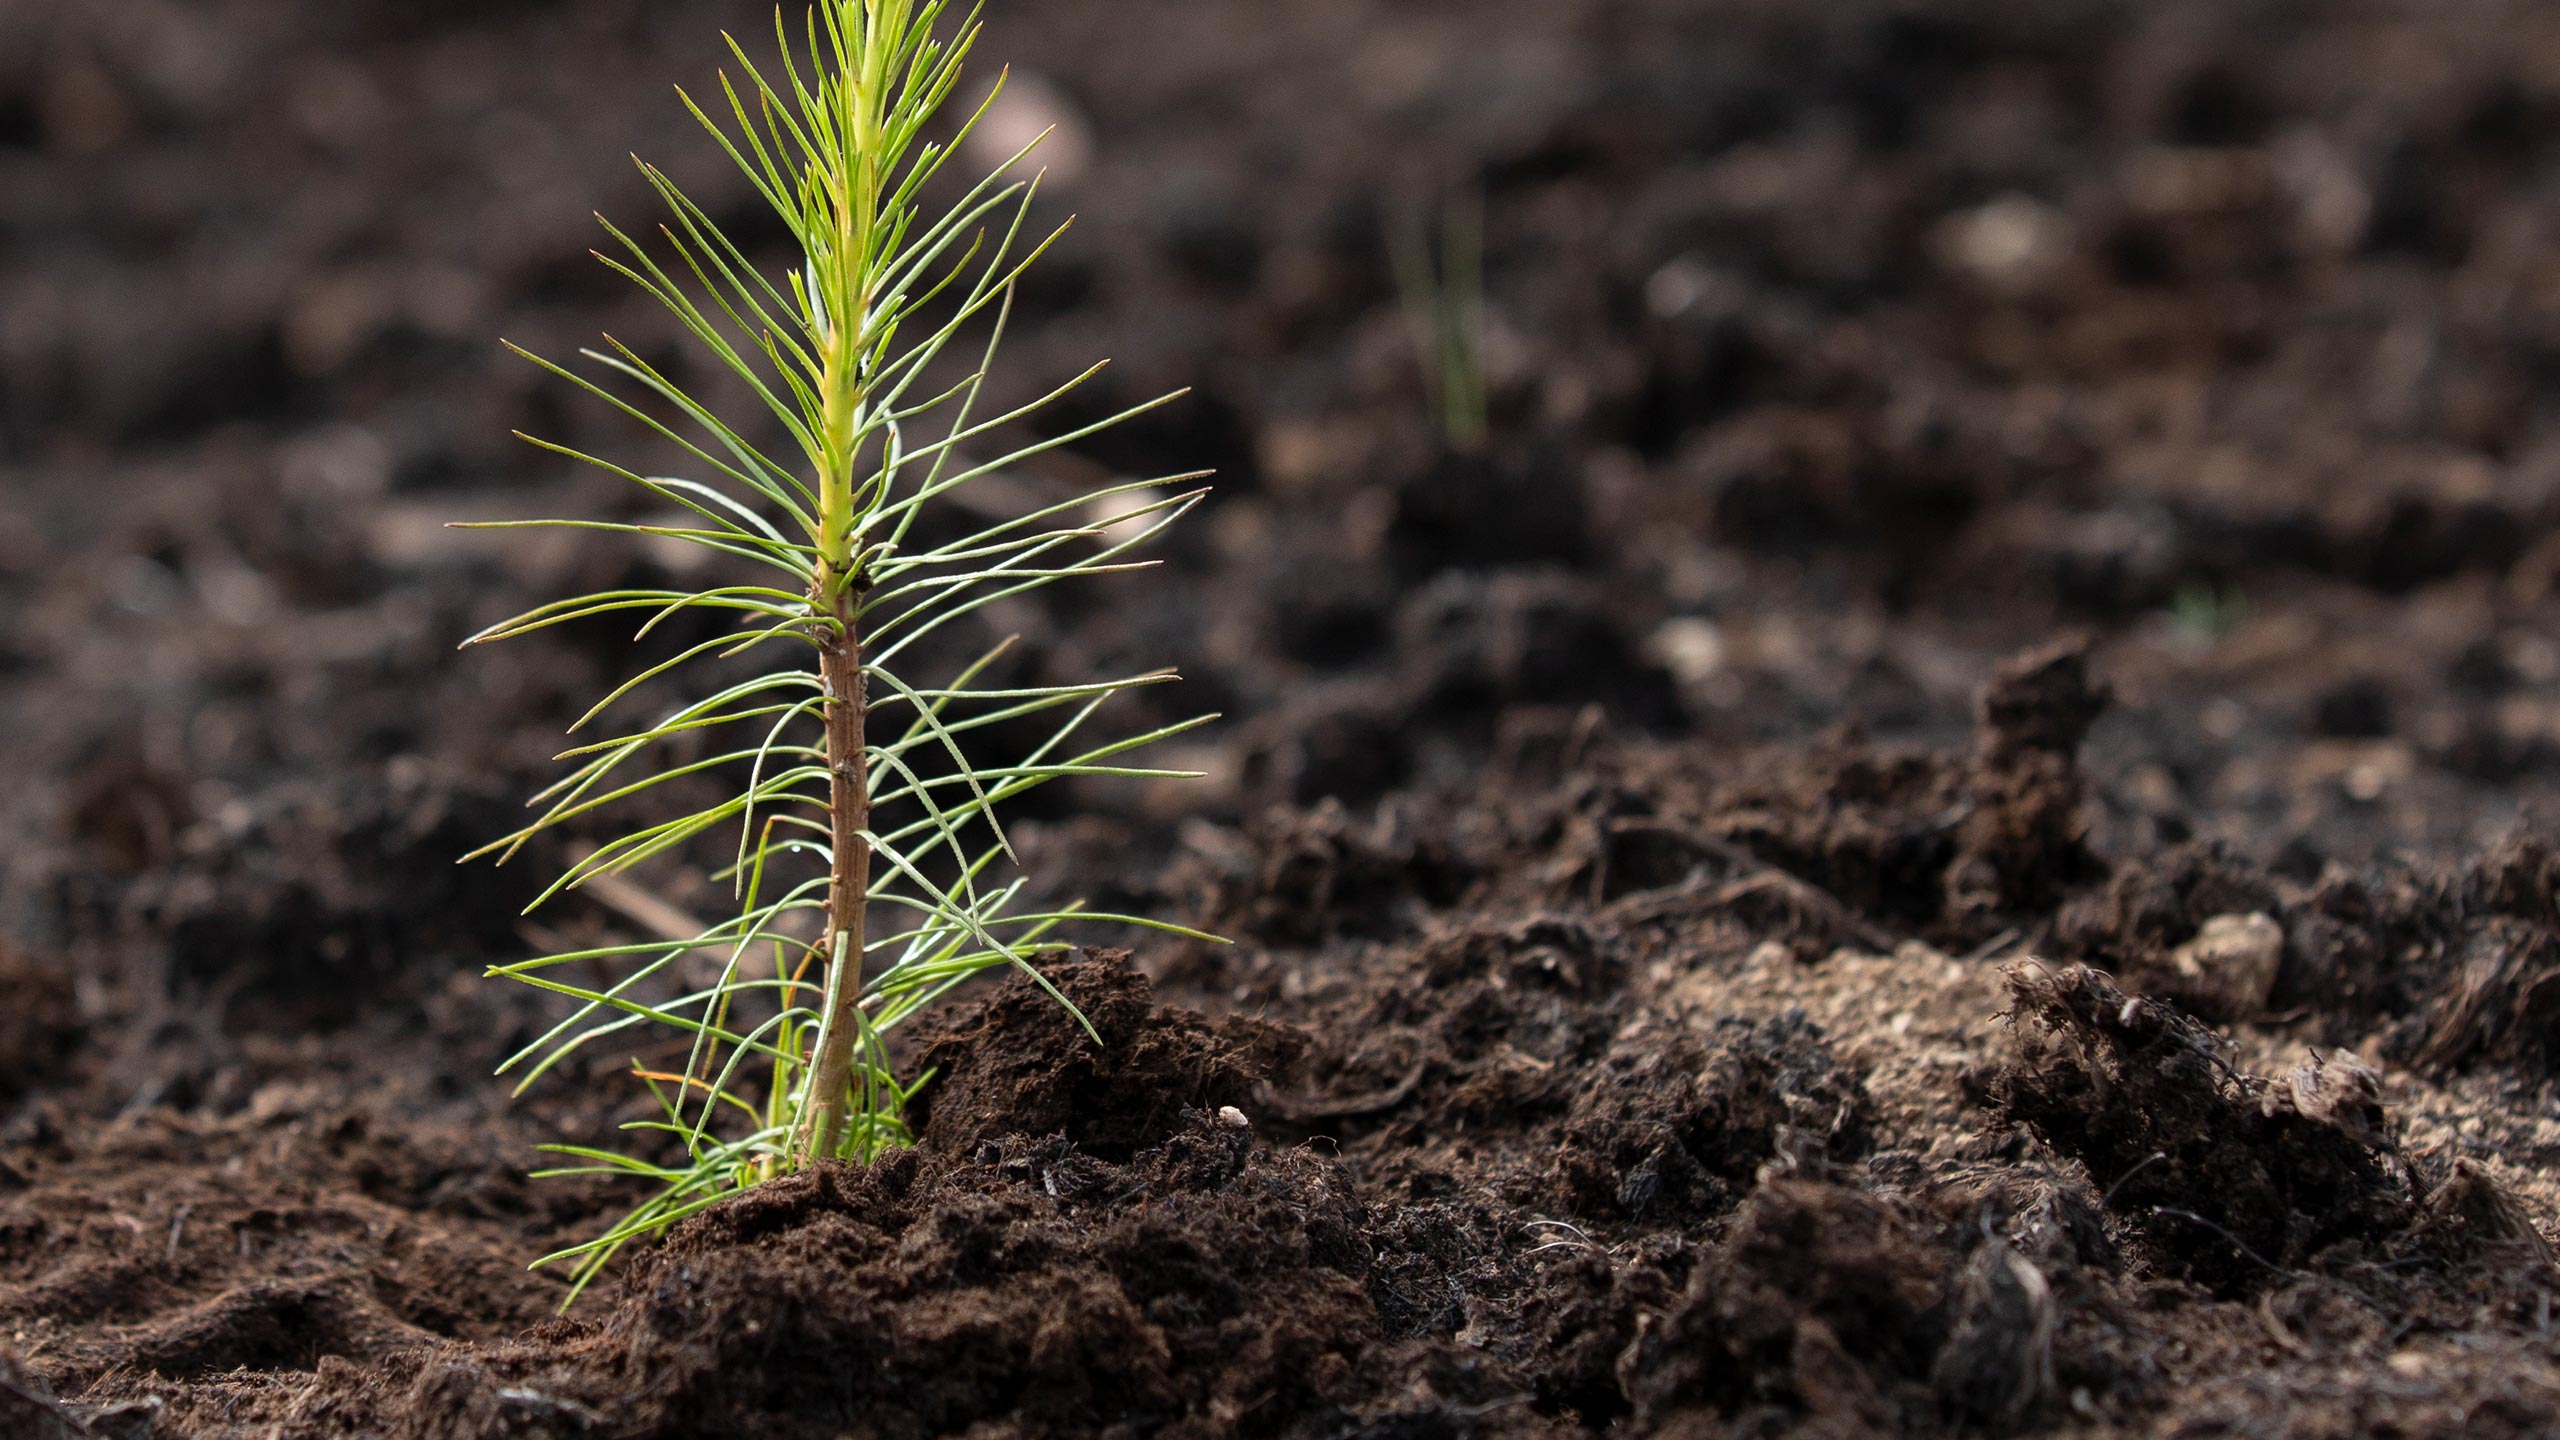 SiiliMetsä aka SiiliForest already growing strong in two locations in Pirkanmaa – more than 30,000 trees planted in 2021